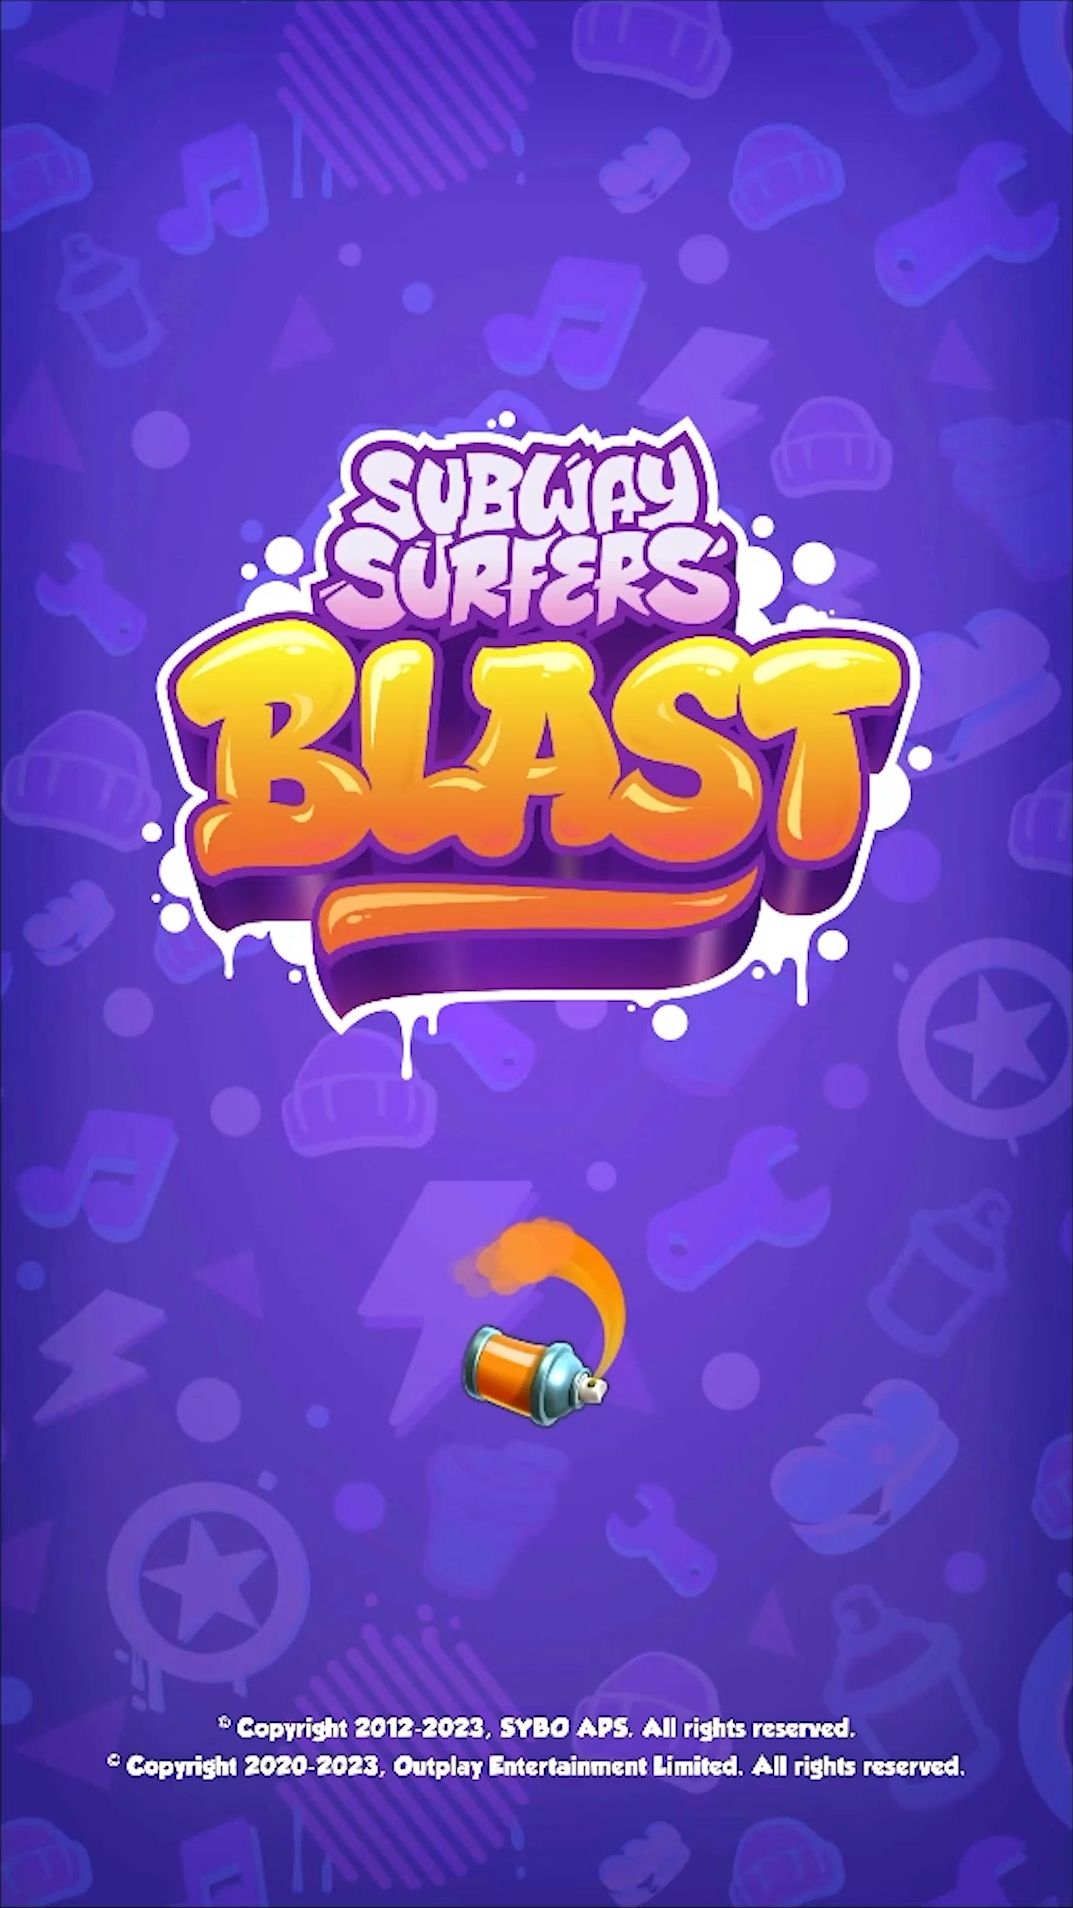 SYBO and Outplay Entertainment have teamed up to release Subway